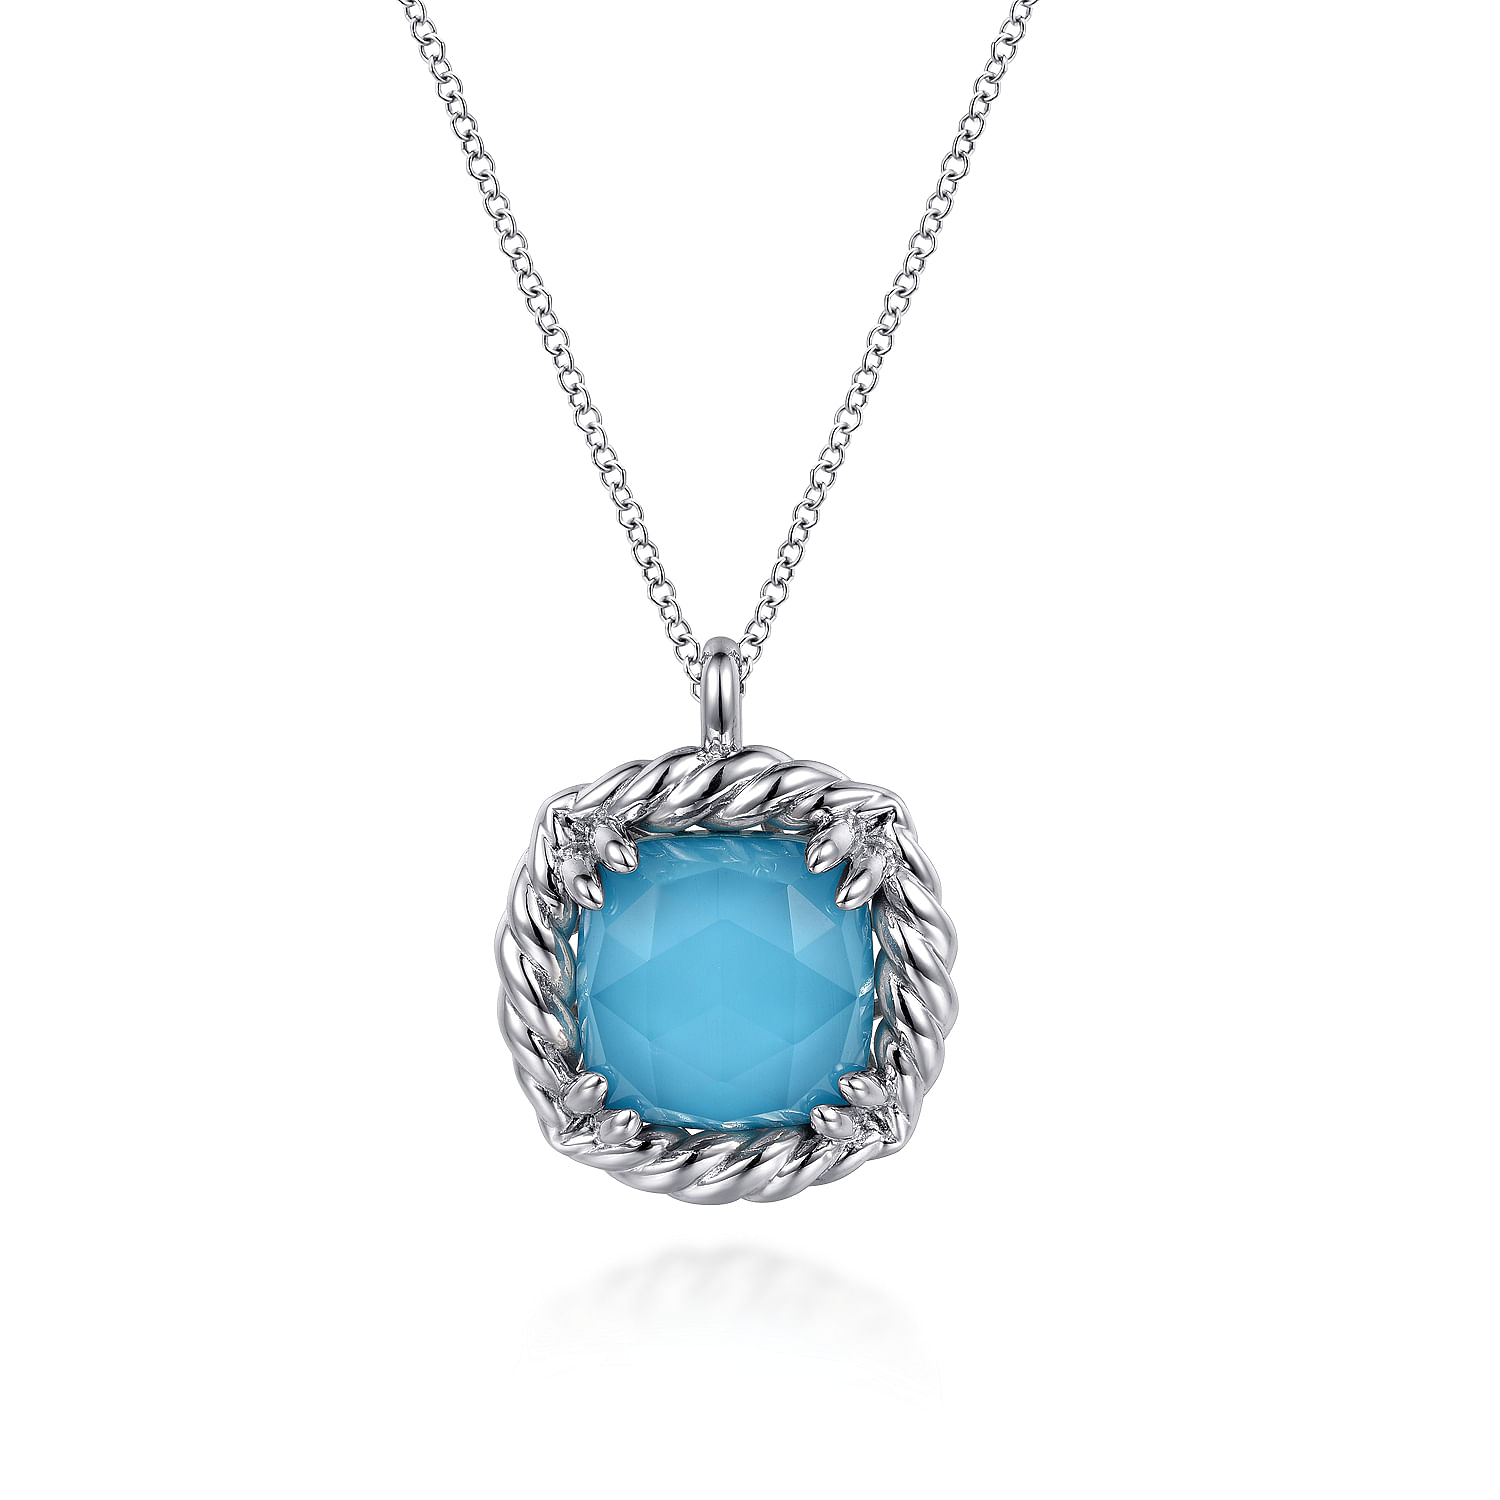 Gabriel - 925 Sterling Silver Rock Crystal and Turquoise Rope Pendant Necklace